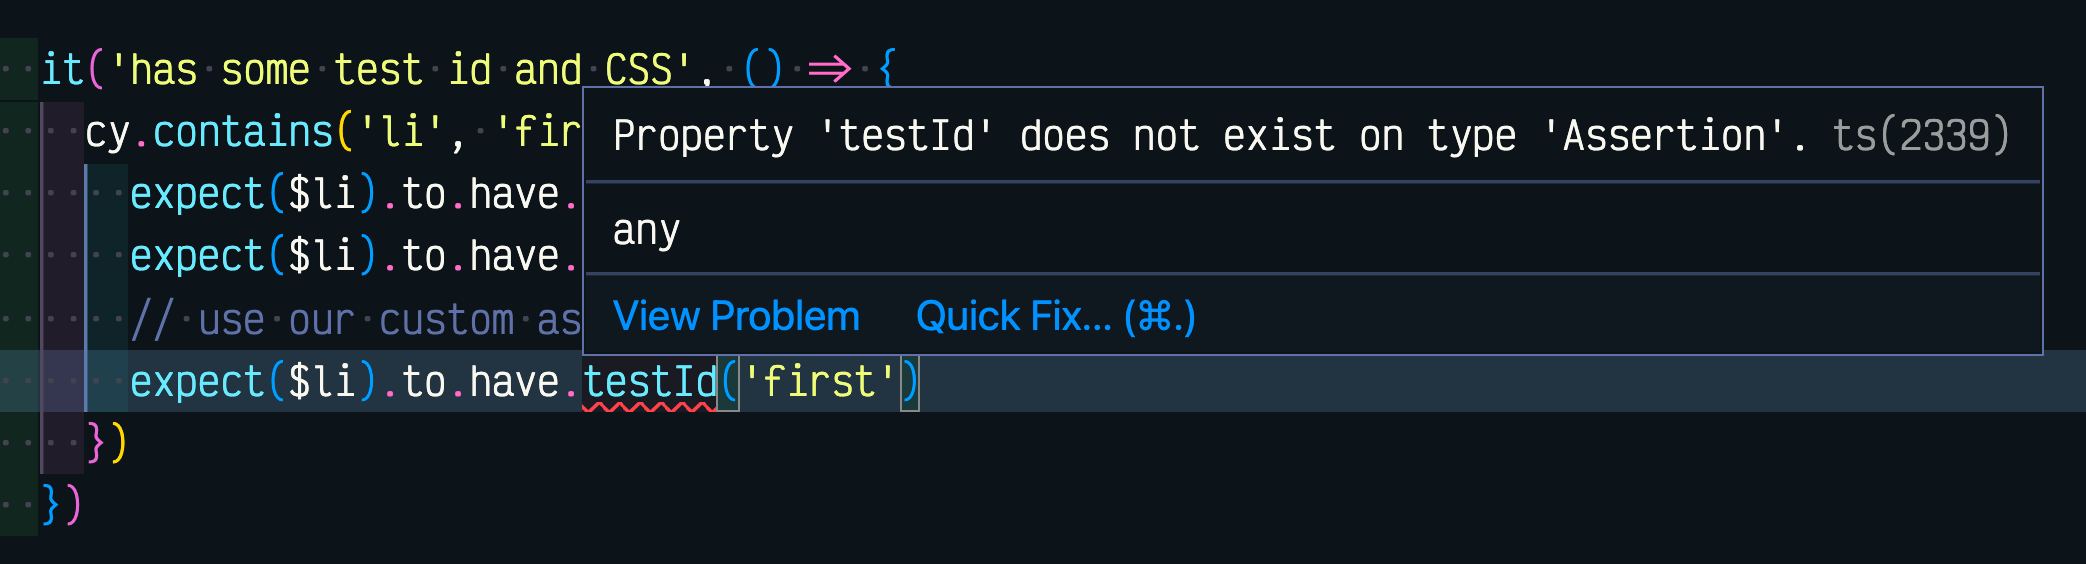 VSCode has no knowledge of the custom assertion